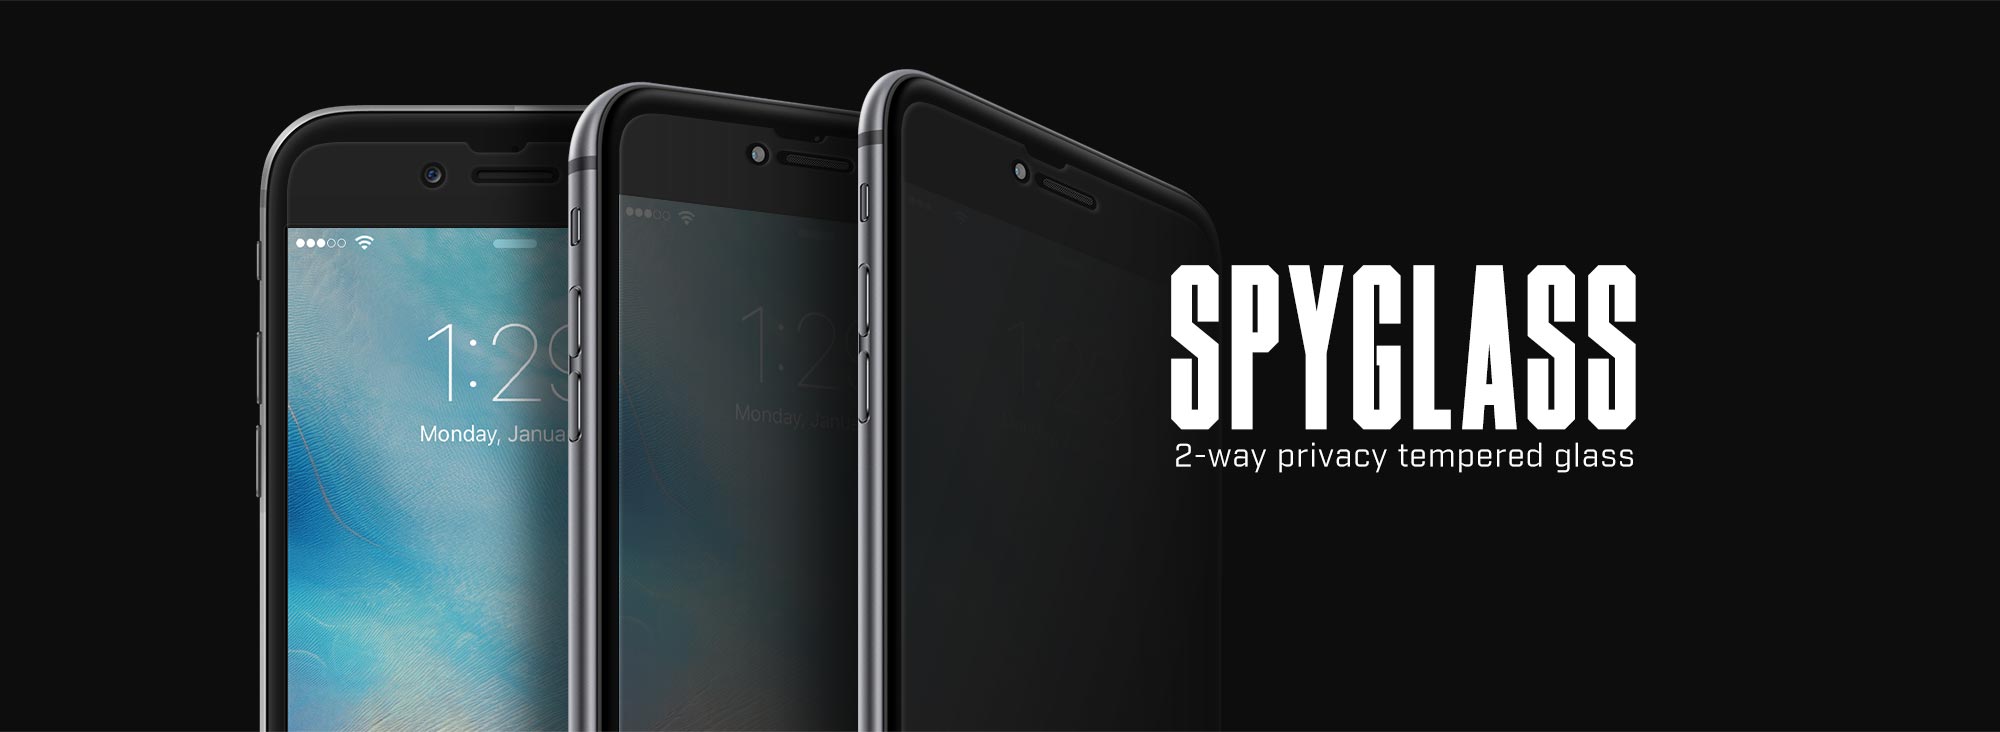 Spyglass Privacy Tempered Glass Screen Protectors ...